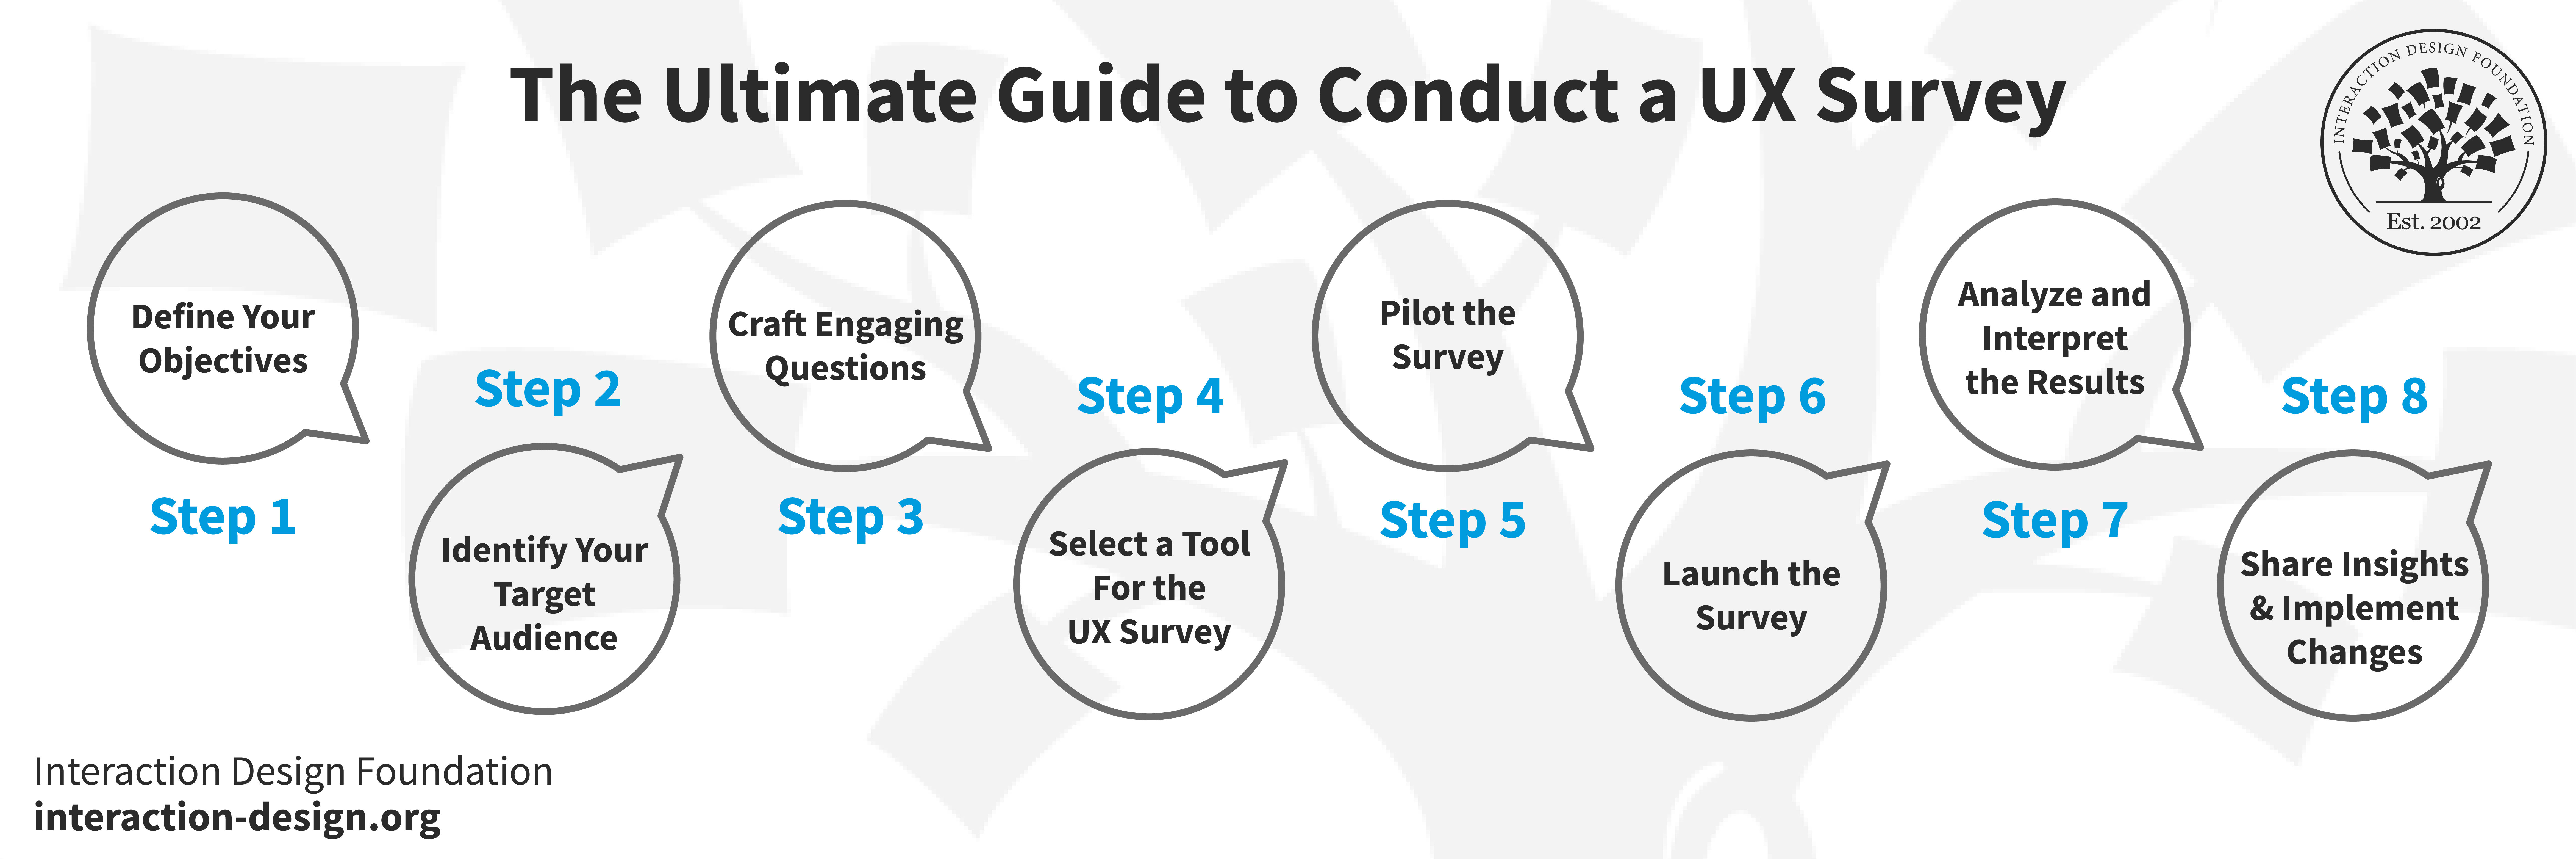  A guide to conduct a UX survey in 8 steps.